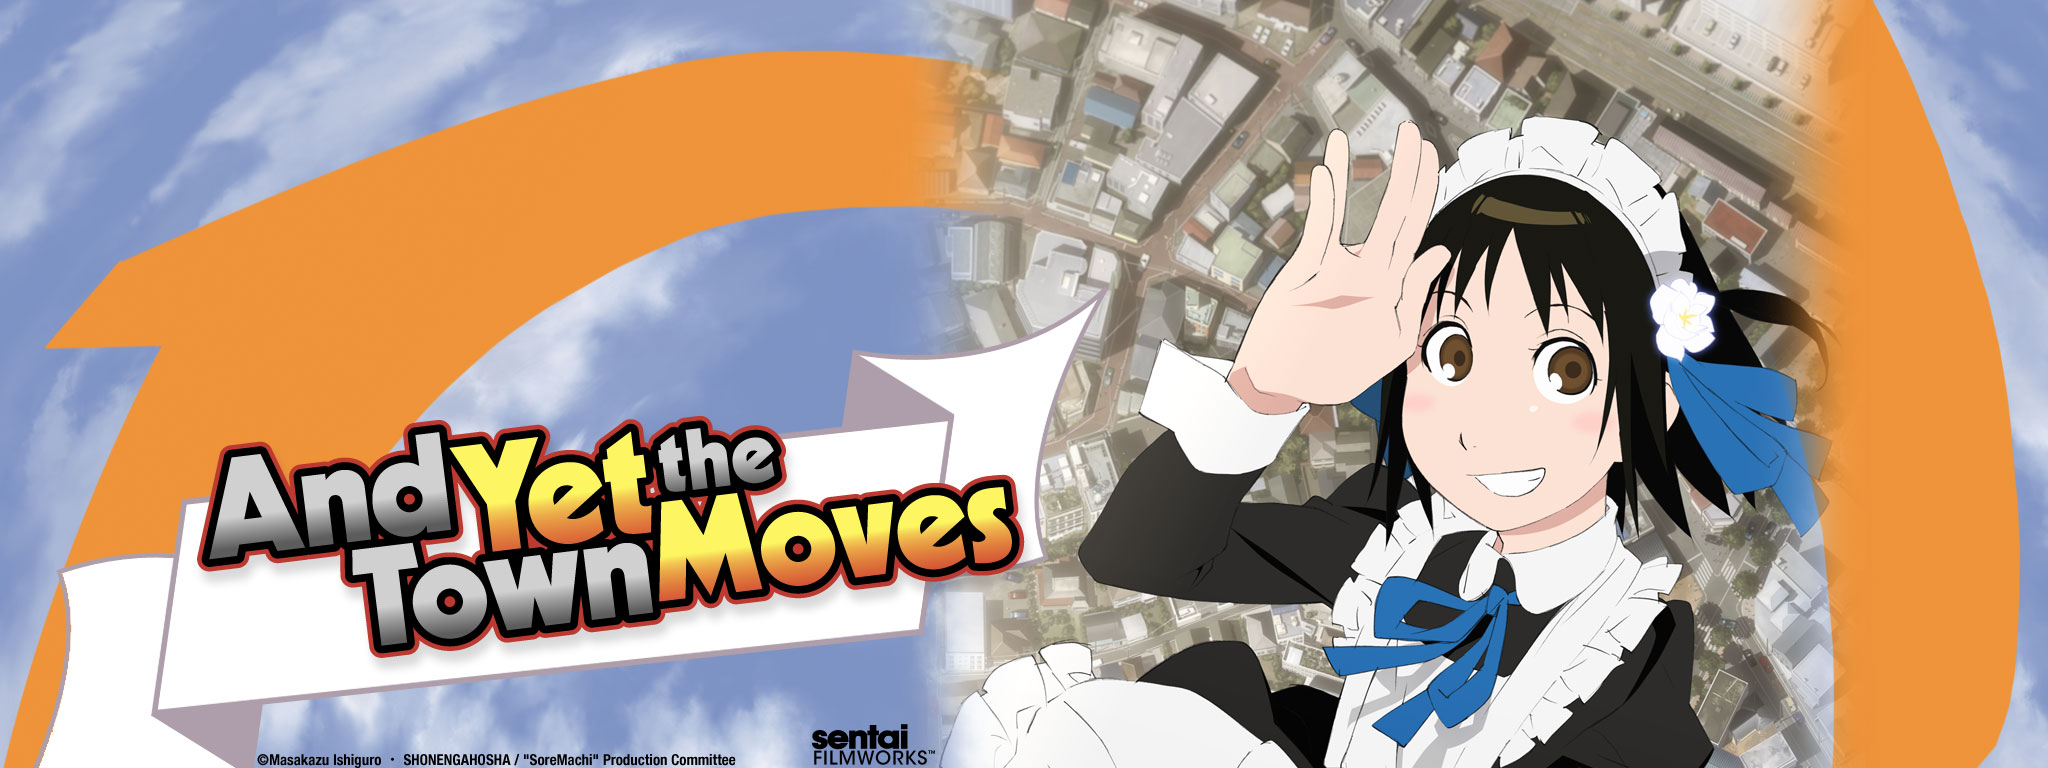 Title Art for And Yet the Town Moves